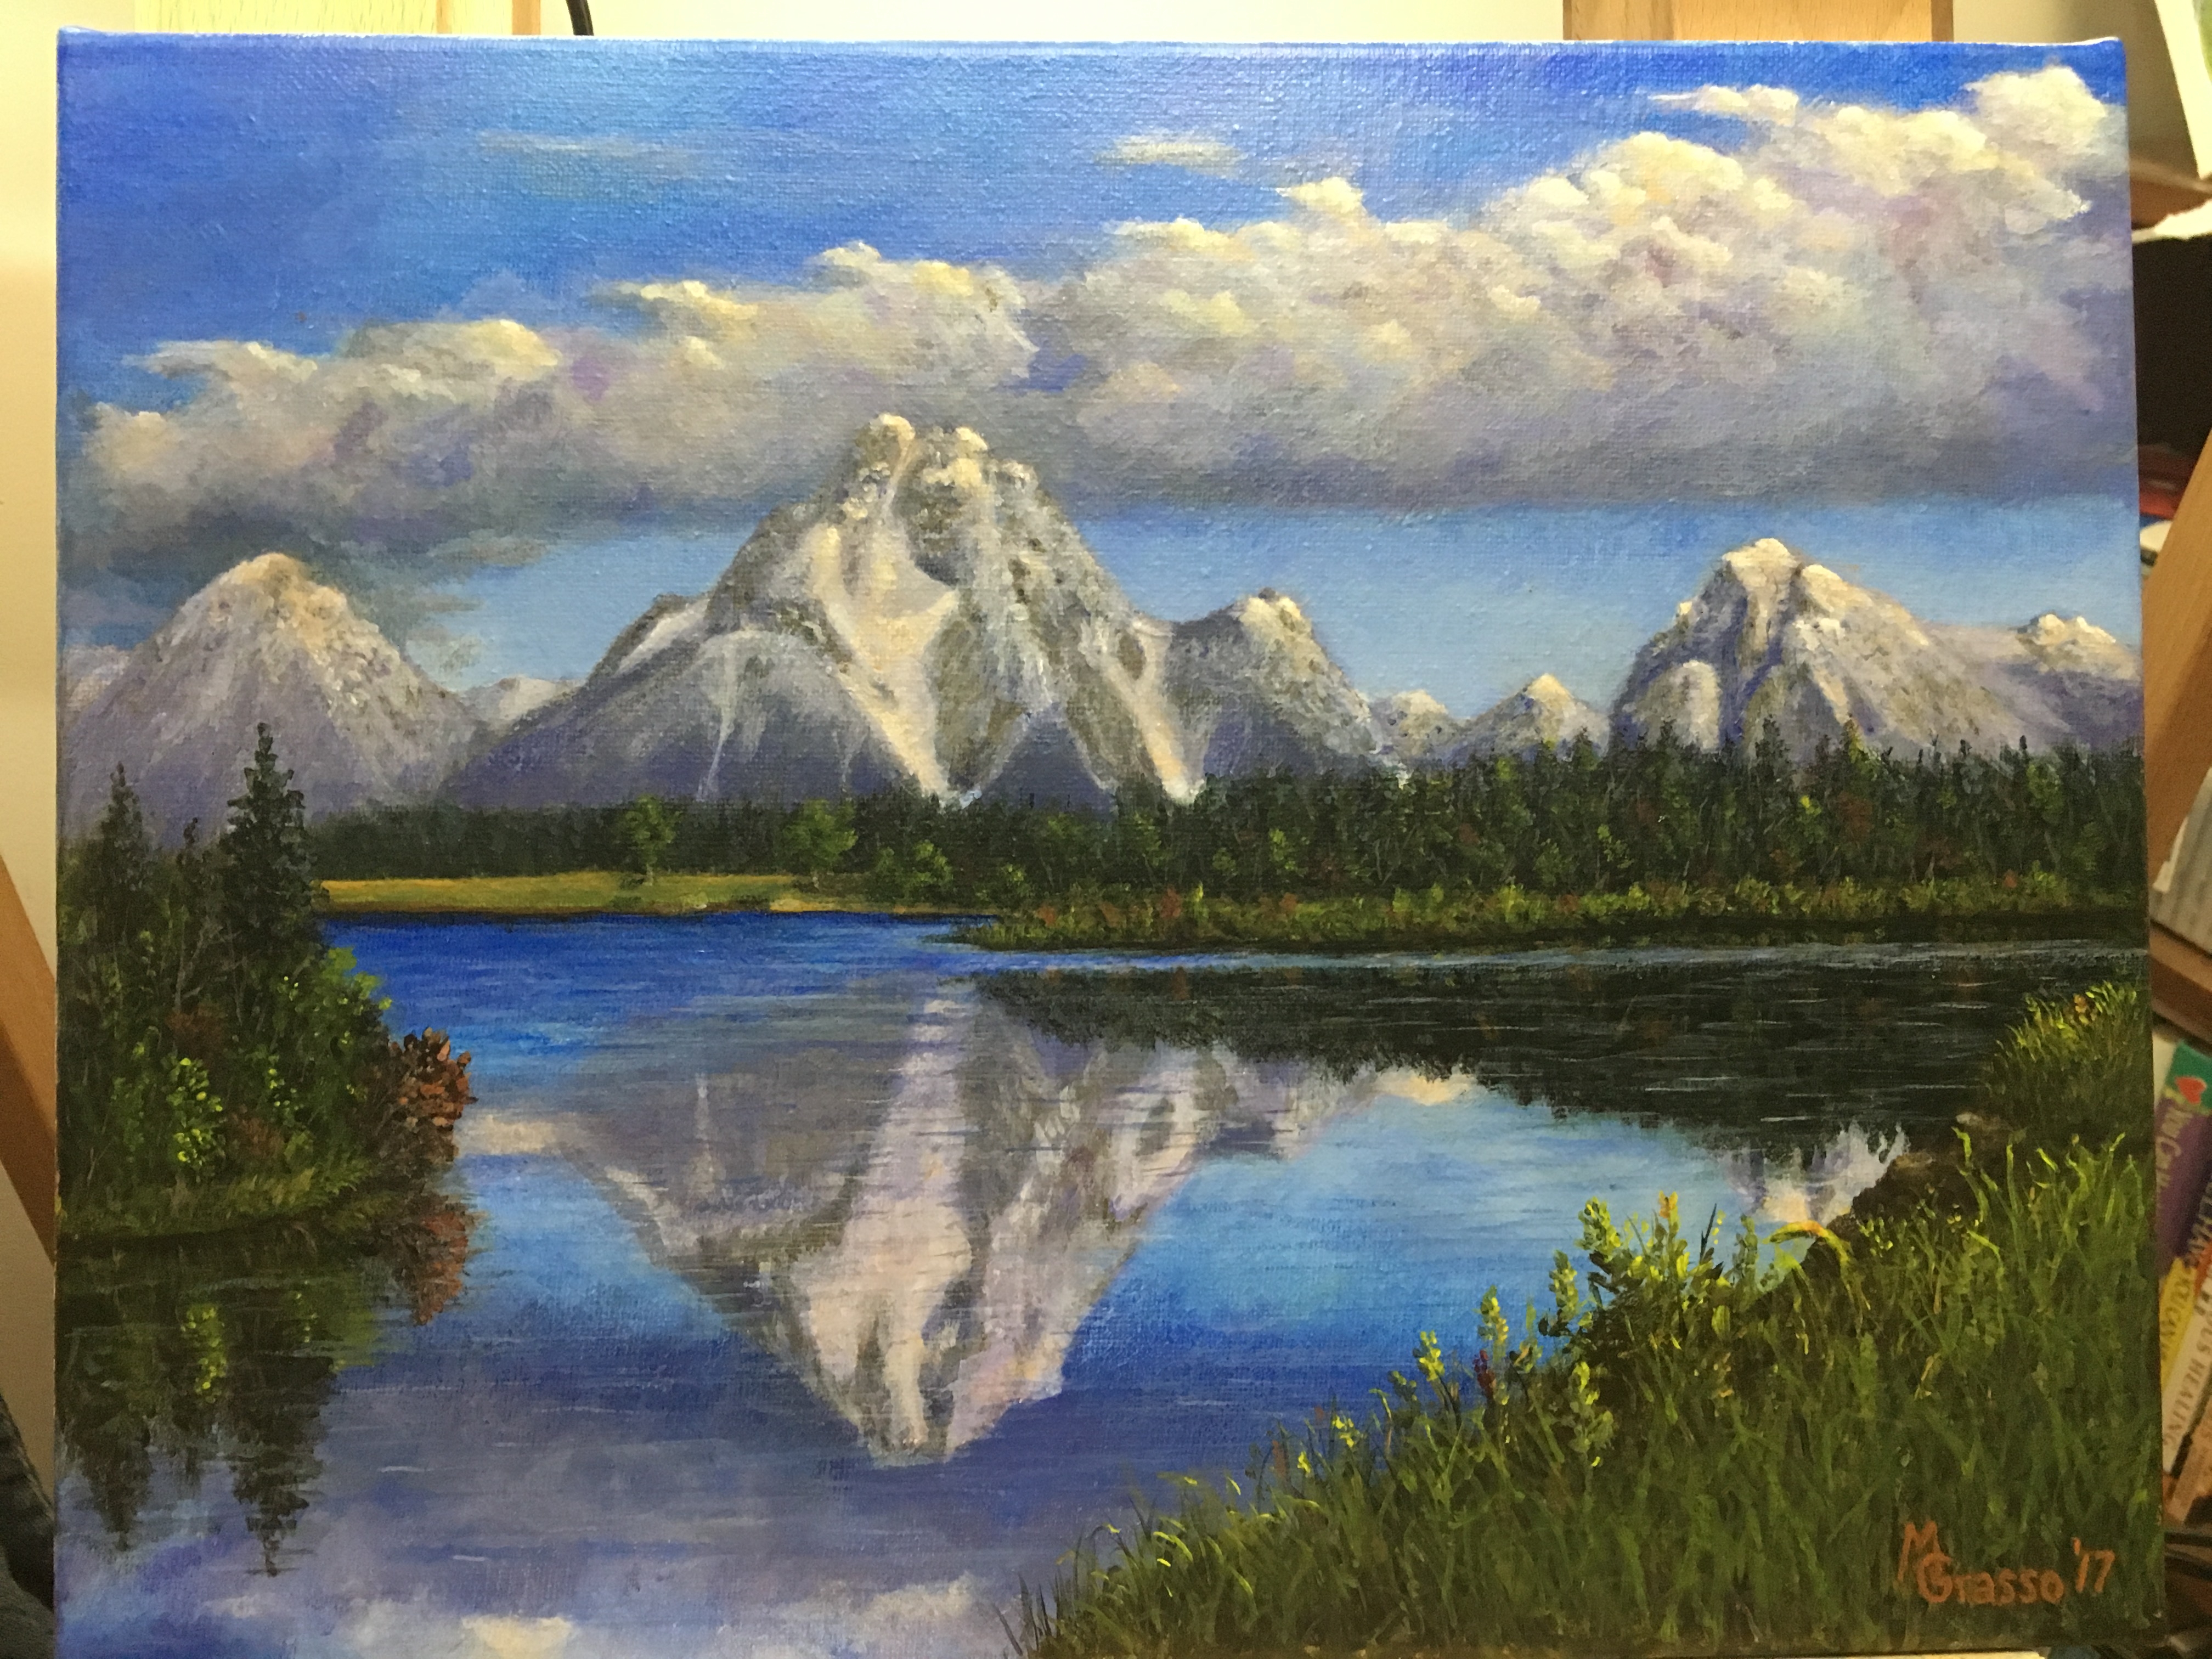 Mt-Moran-from-Oxbow-Bend - Pastel Painting Lessons : Pastel Painting Lessons